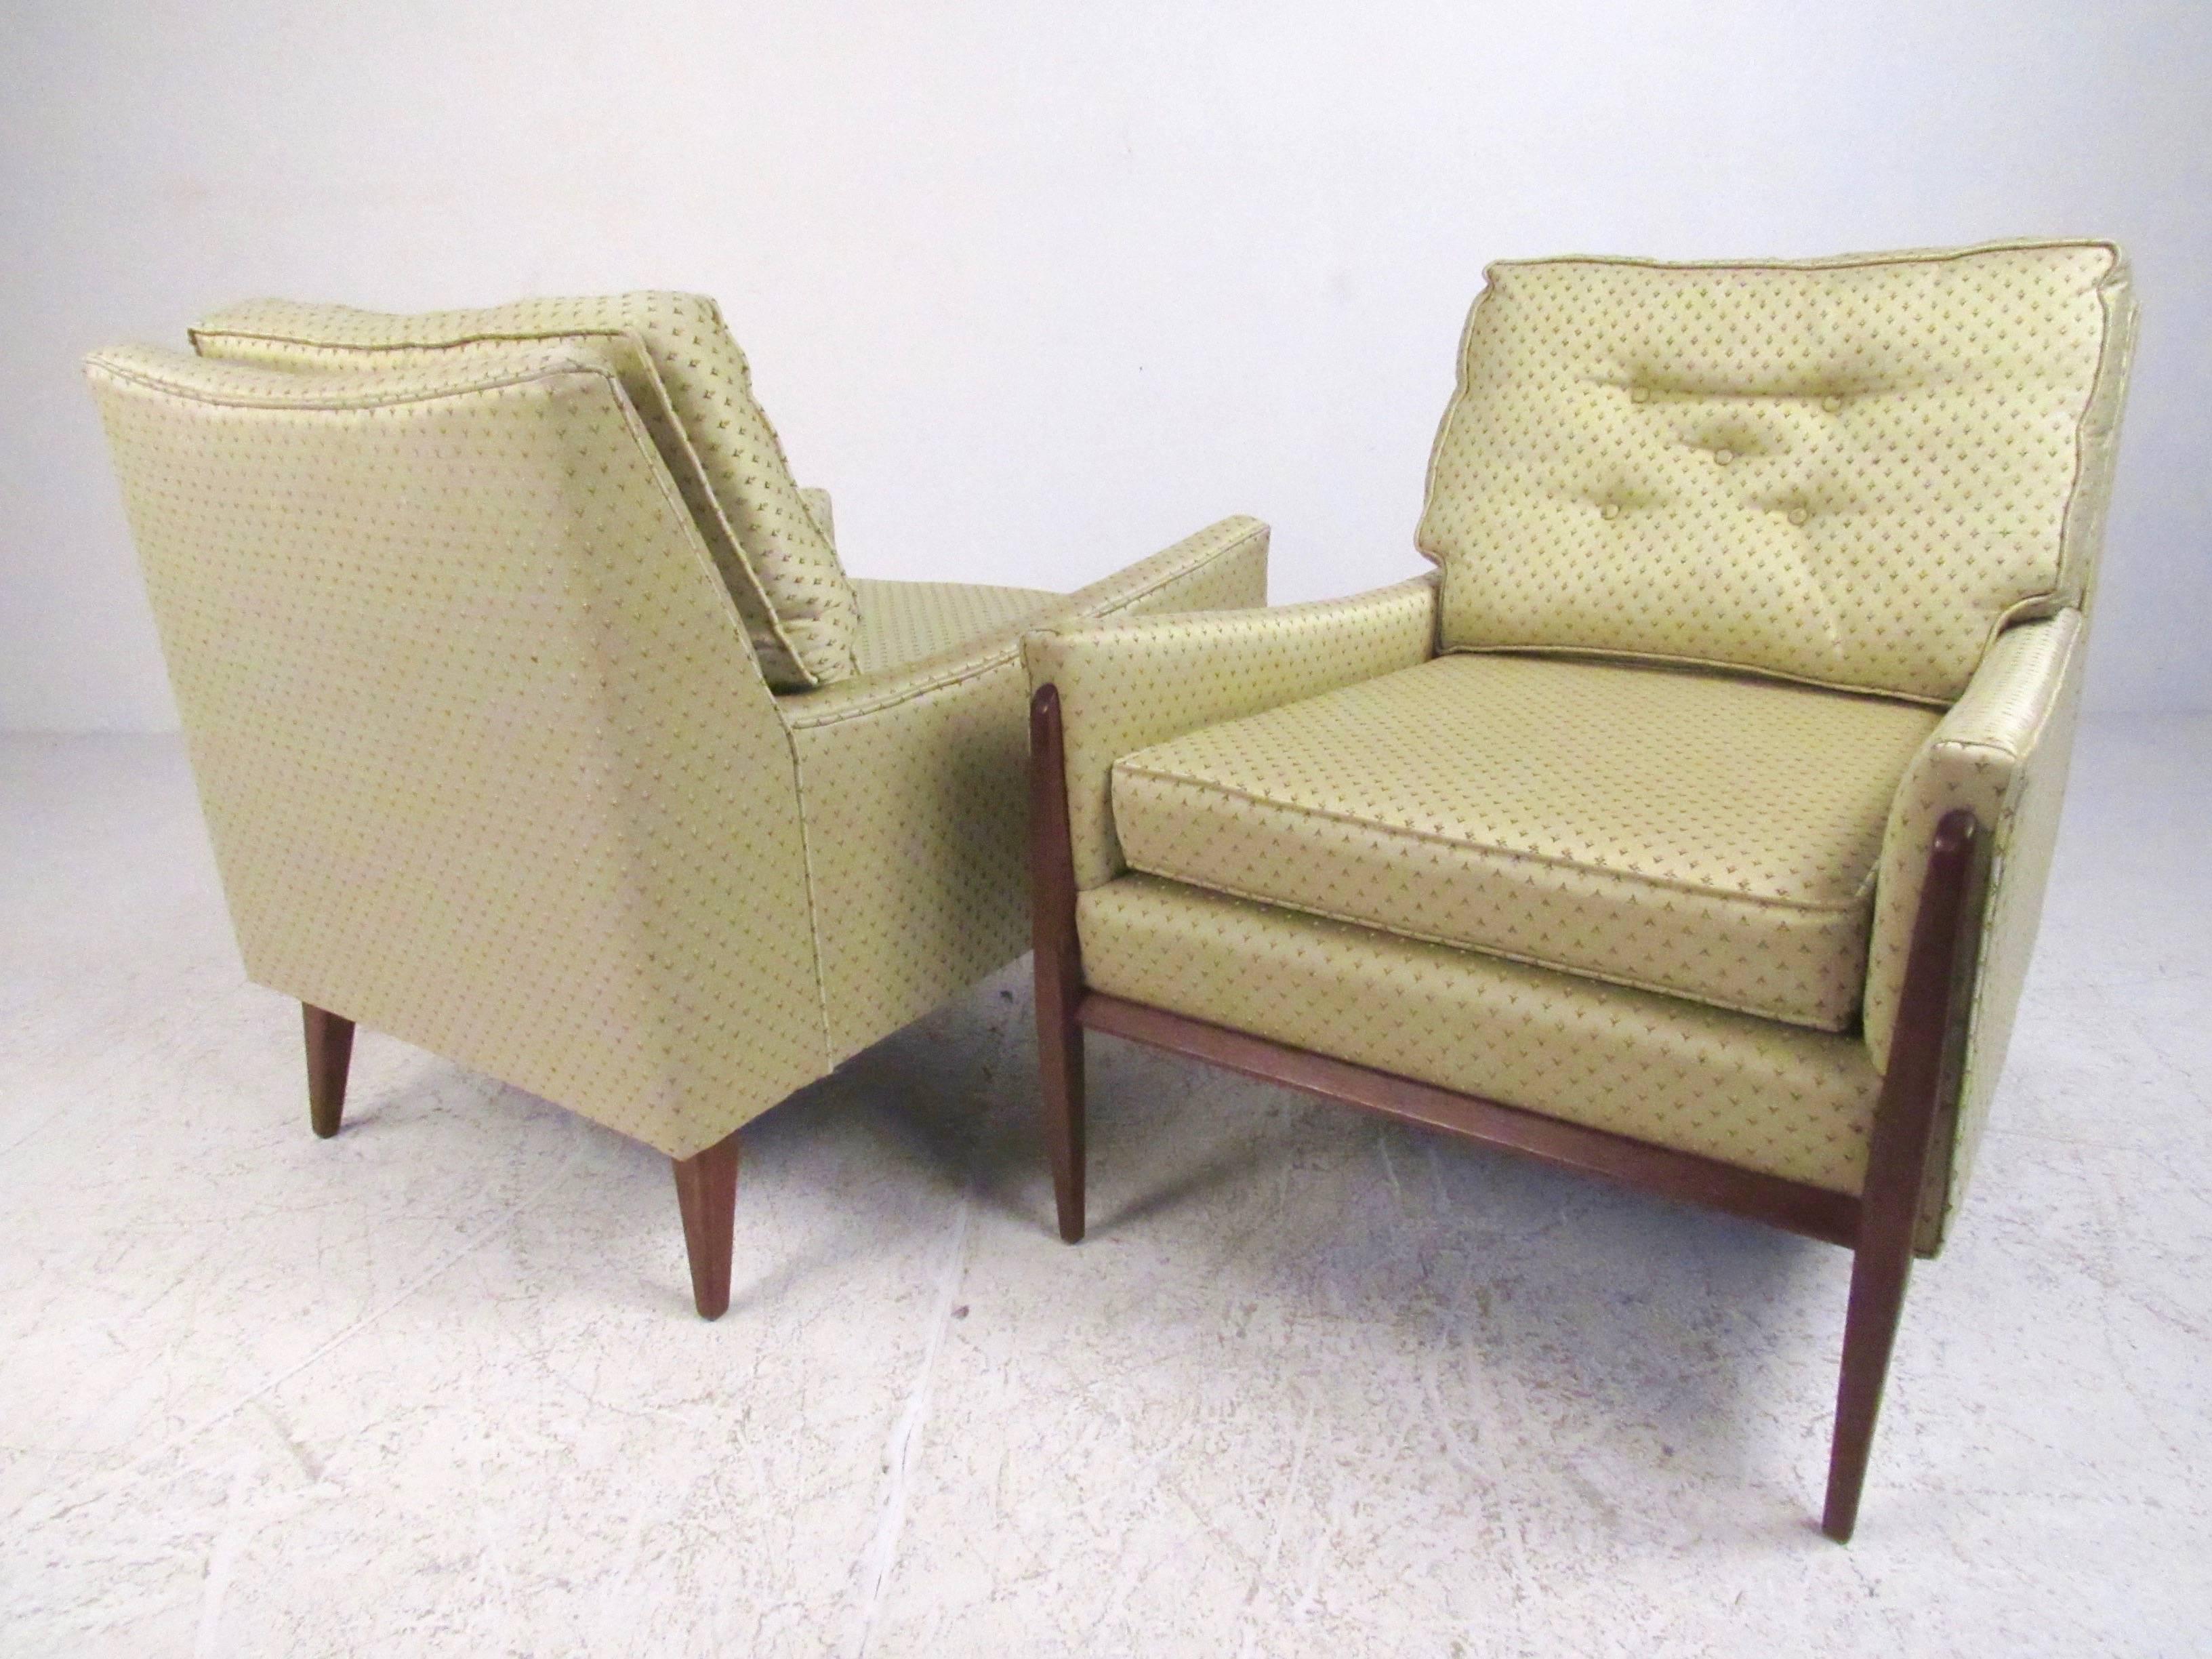 This exquisite pair of Paul McCobb style lounge chairs feature comfortably upholstered seats with tufted fabric and sculpted walnut frames. This stylish Mid-Century Modern pair of chairs make a beautiful addition to home or business seating. Please